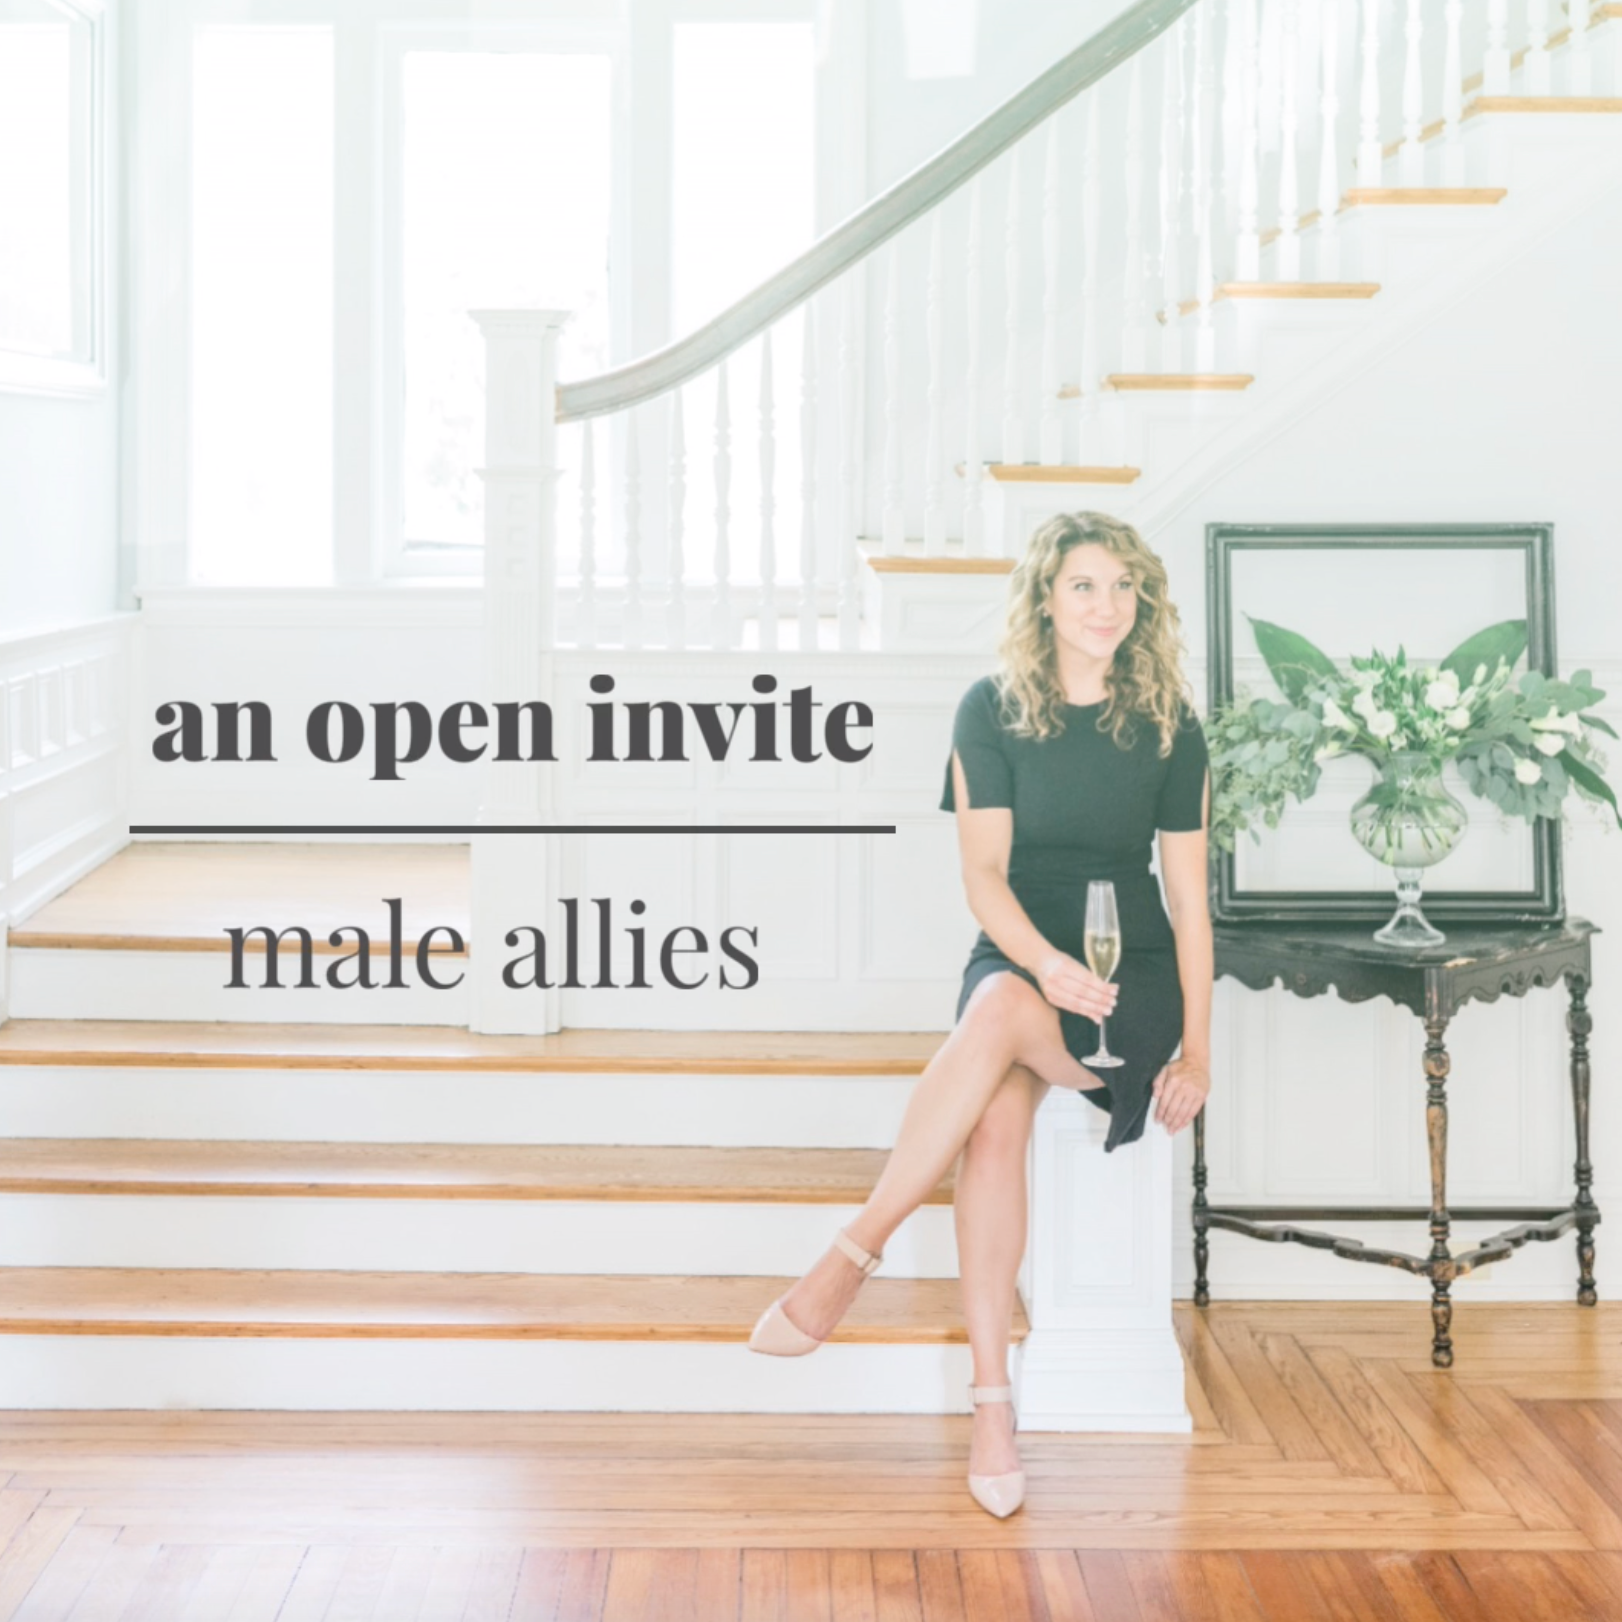 An Open Invitation to "Male Allies"